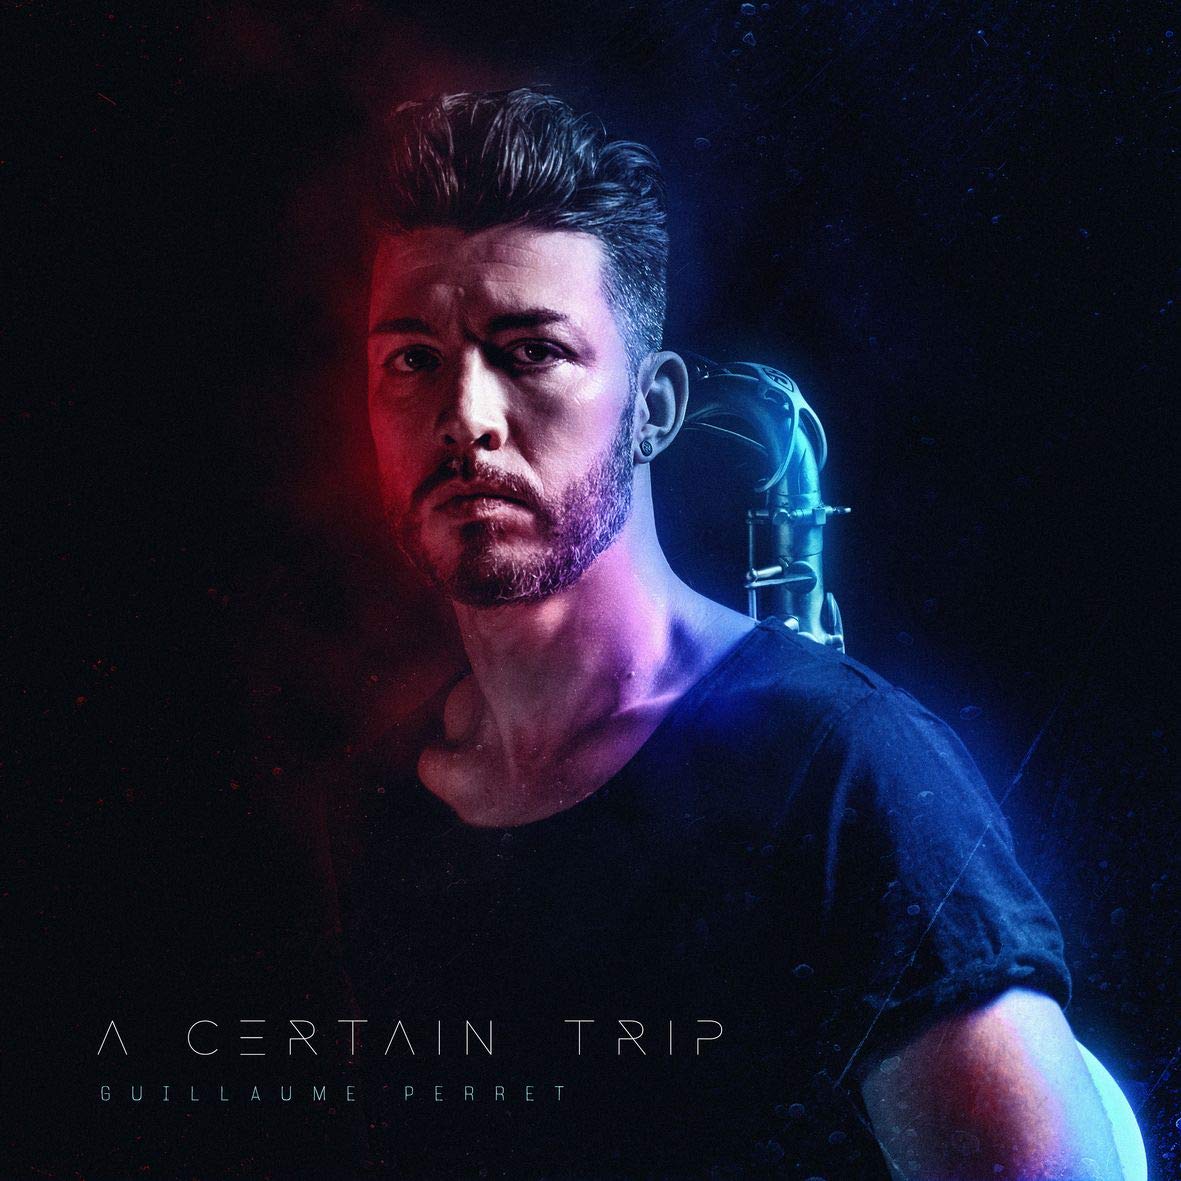 GUILLAUME PERRET - A Certain Trip cover 